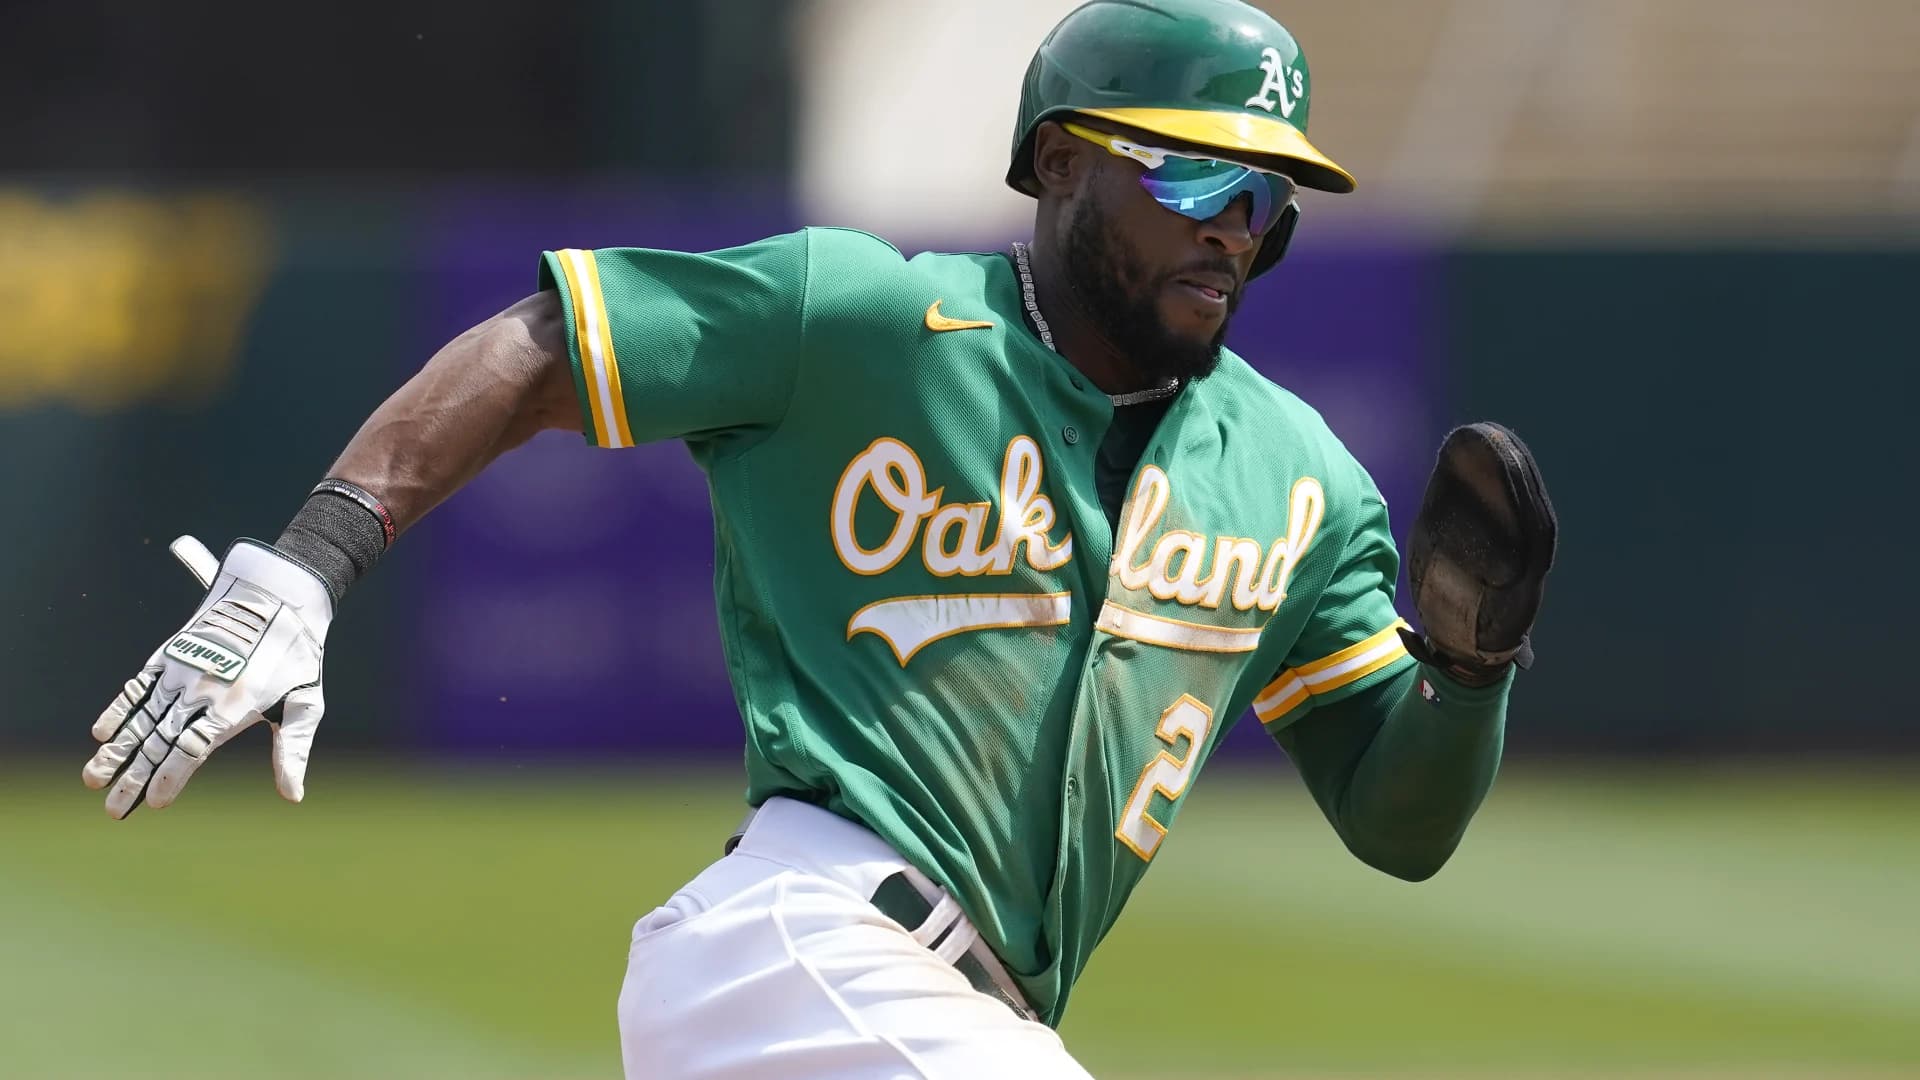 AP source: Mets add CF Marte with $78 million, 4-year deal